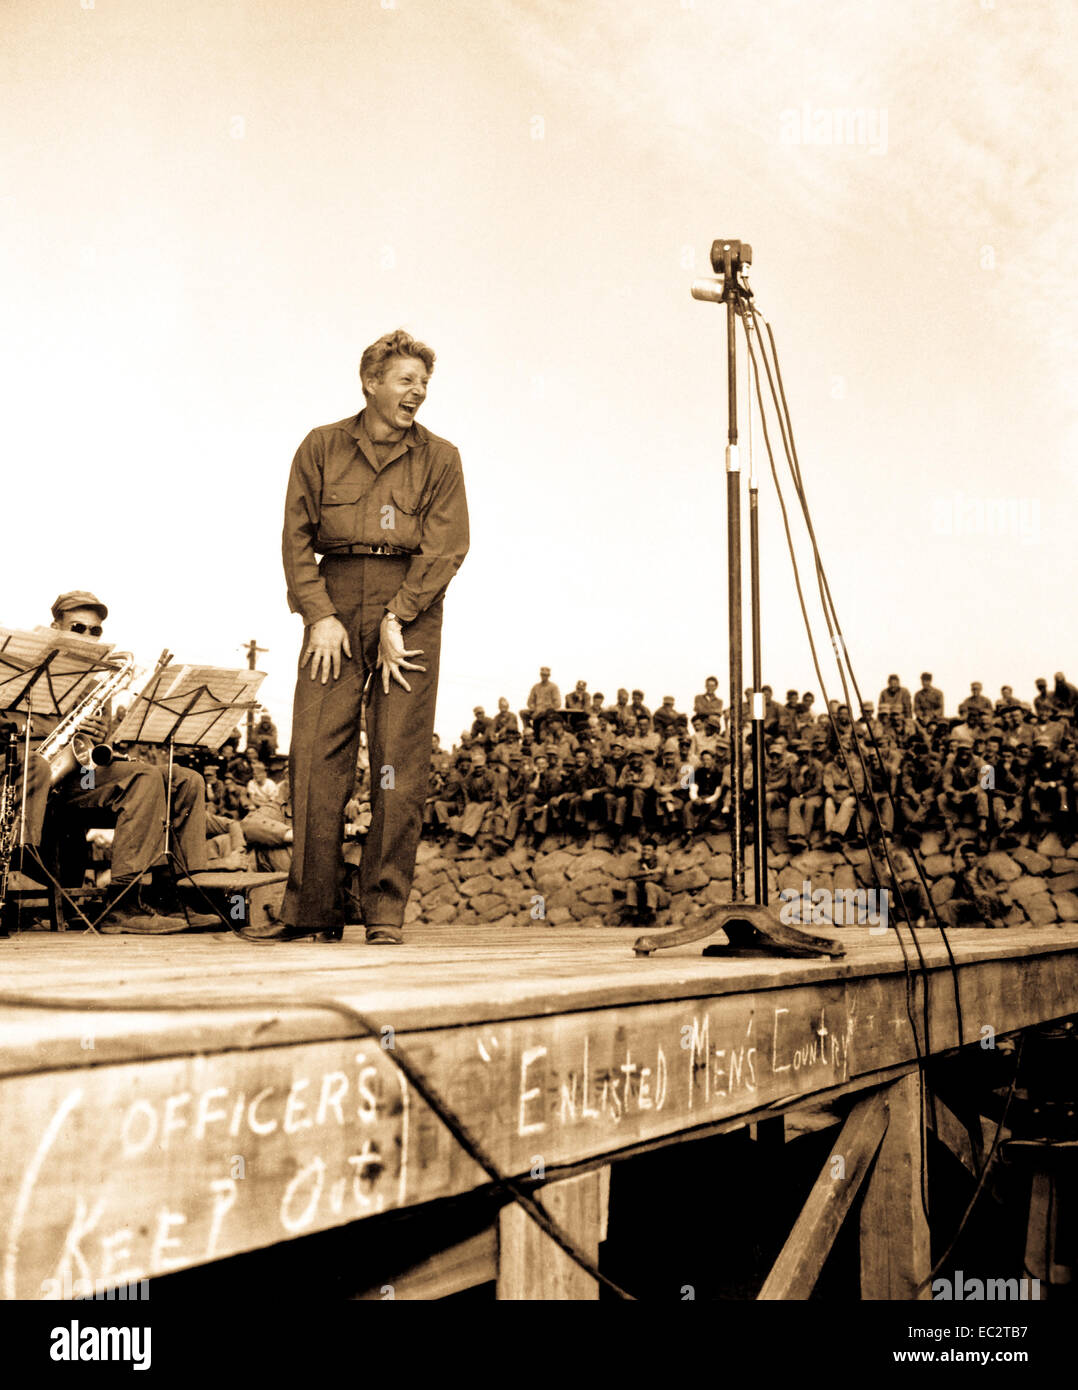 Danny Kaye, well  known stage and screen star, entertains 4,000 5th Marine Div. occupation troops at Sasebo, Japan.  The crude sign across the front of the stage says: 'Officers keep out!  Enlisted men's country.' Stock Photo